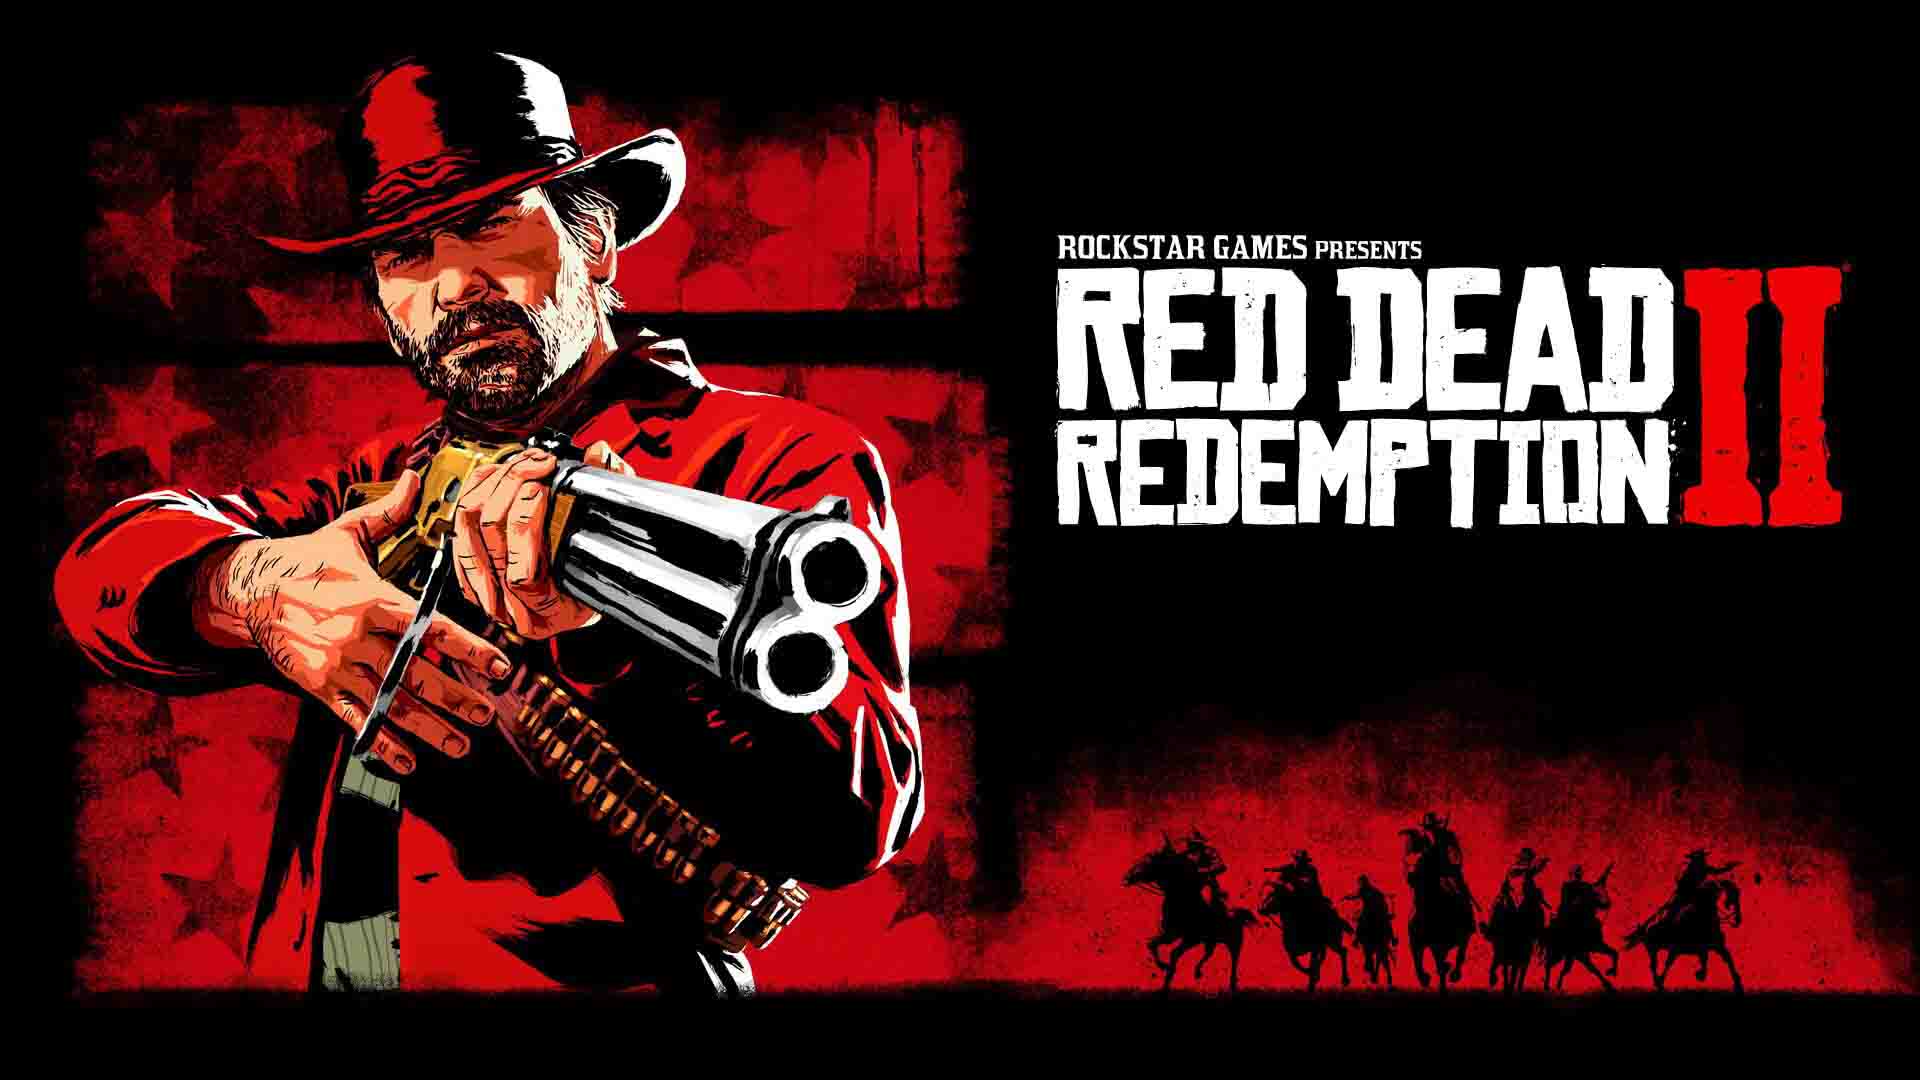 Red Dead Redemption III (RDR 2) System Requirements for PC Games minimum, recommended specifications for Windows, CPU, OS, RAM Memory, Storage, and GPU.